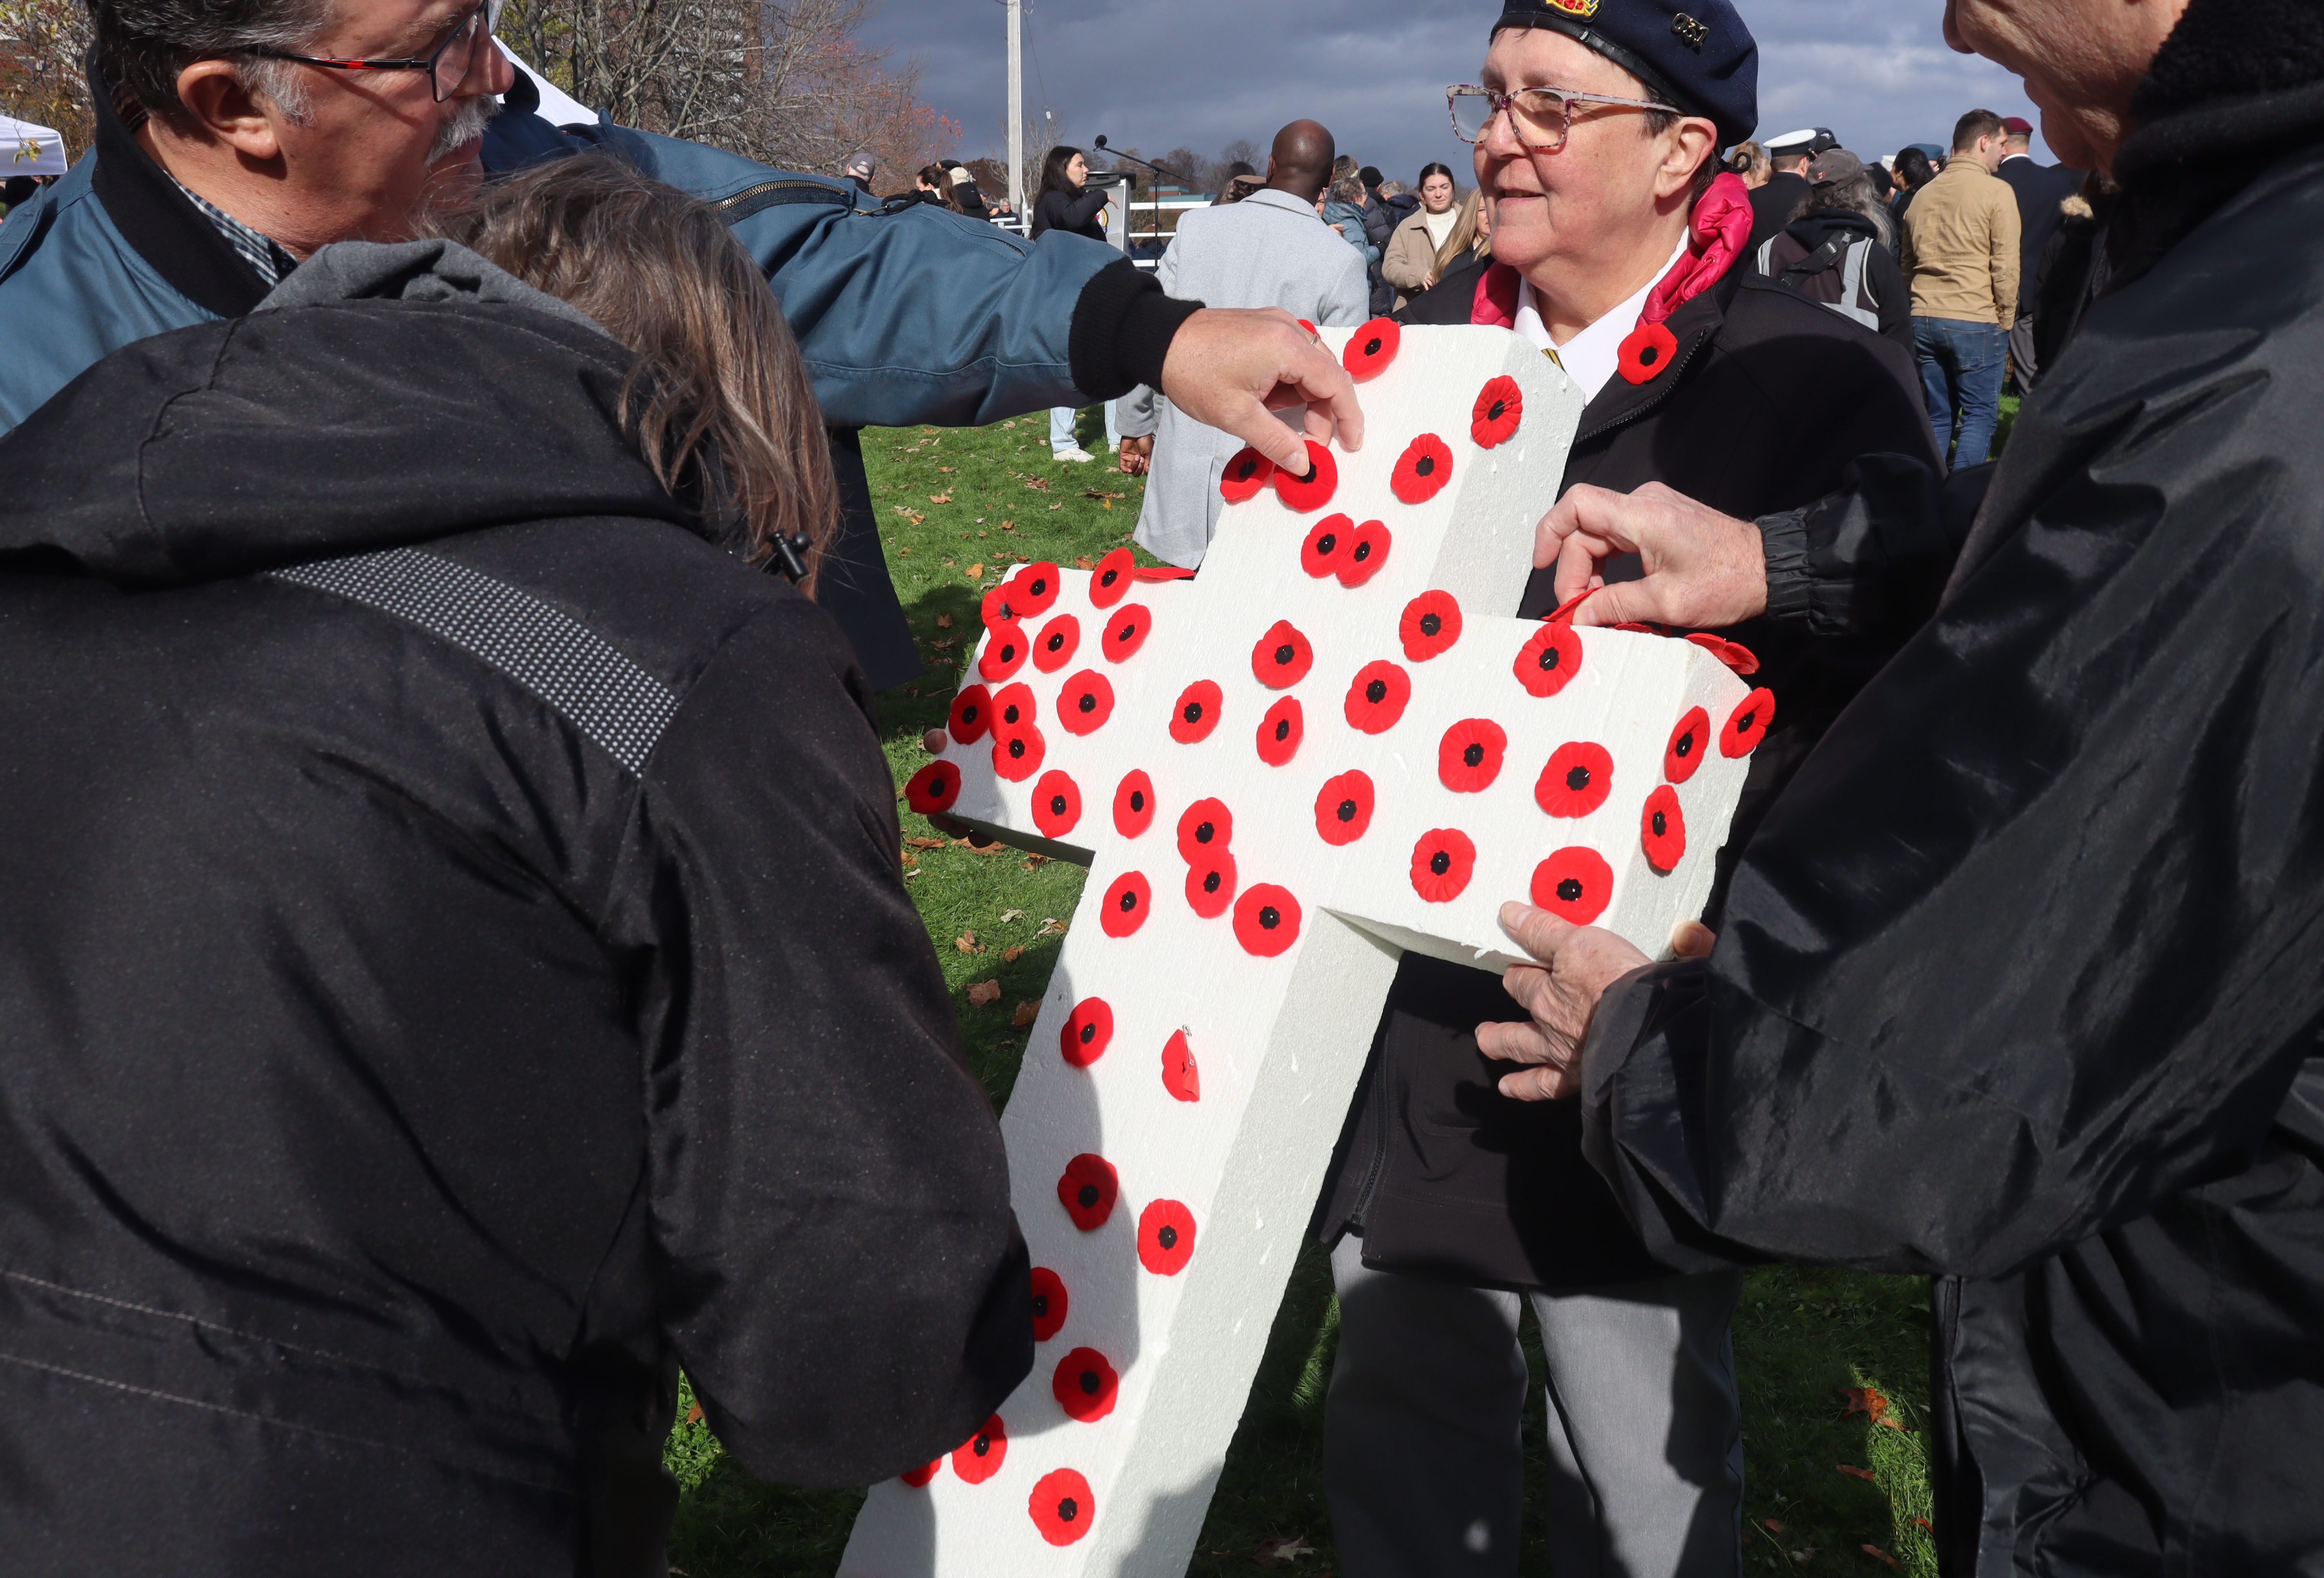 People place their poppies on crosses as the ceremony ends